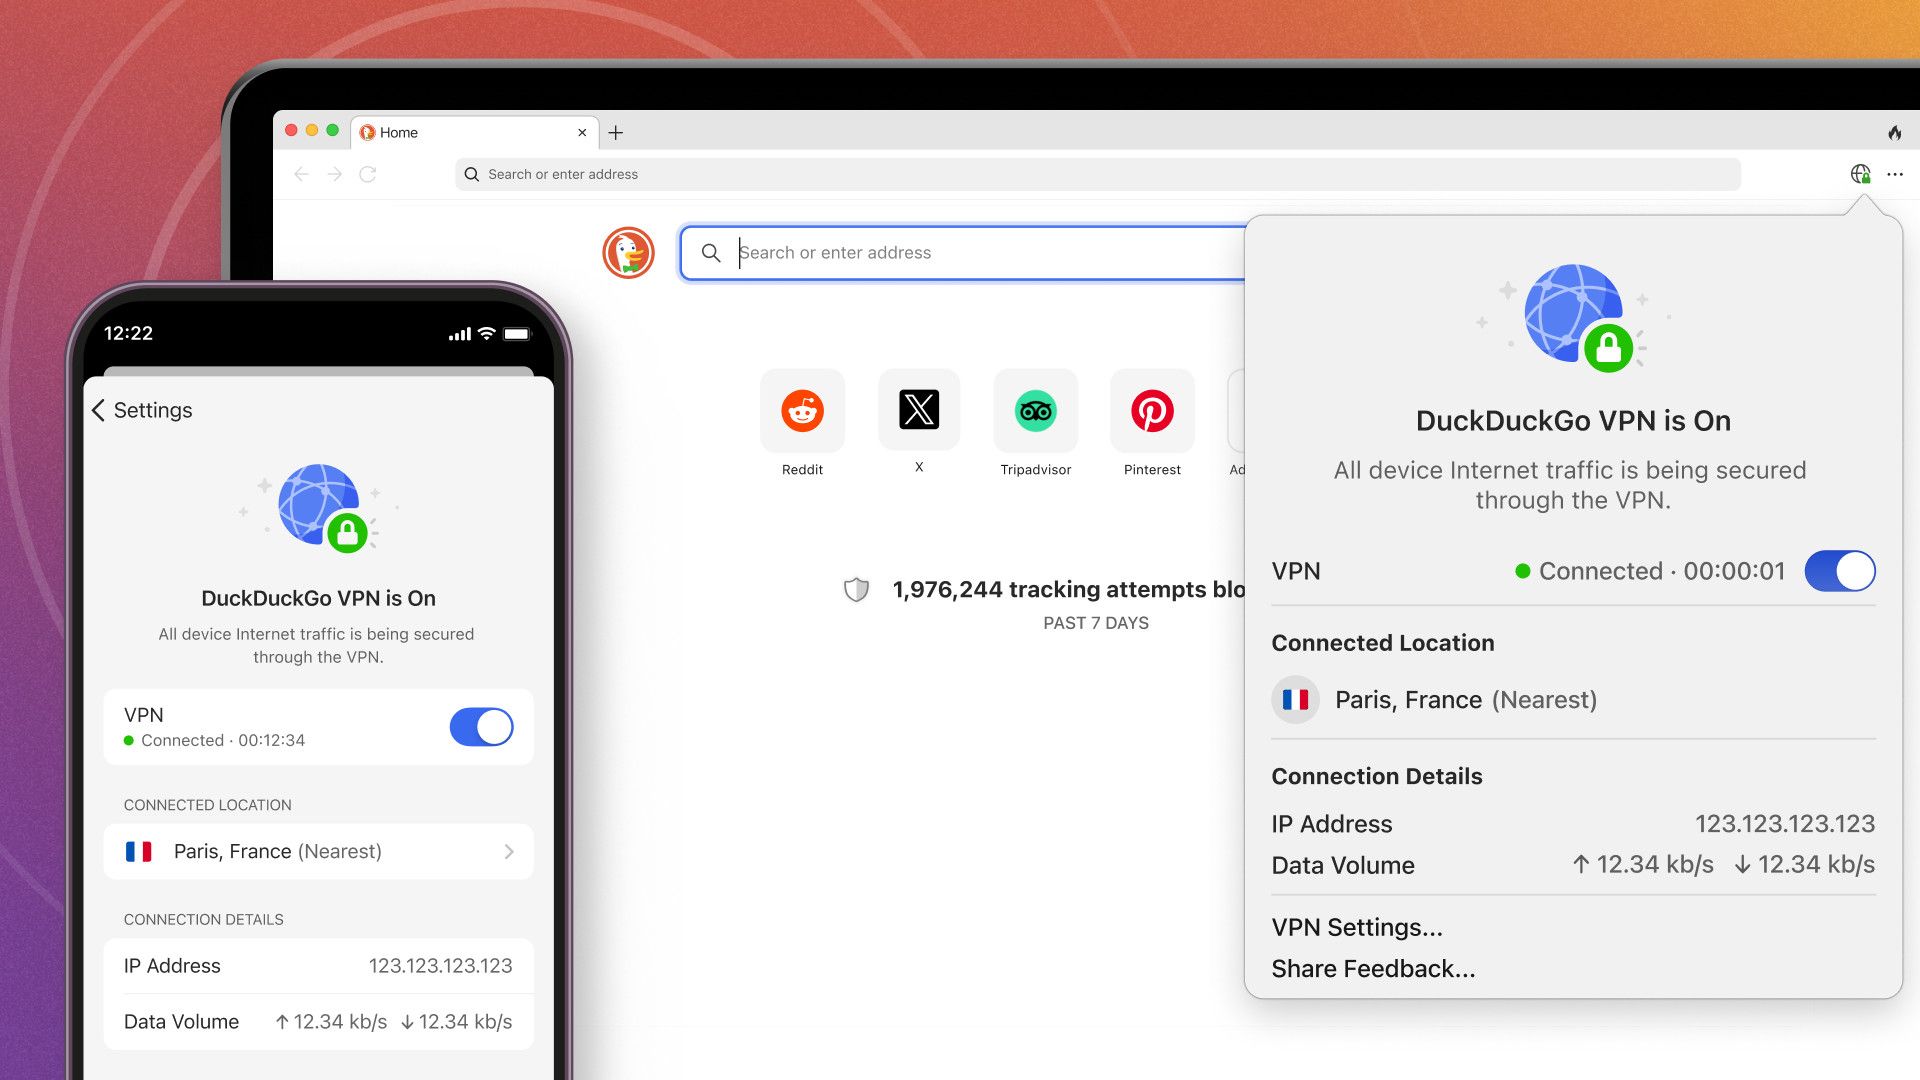 DuckDuckGo launches privacy-focused subscription with VPN and identity protection - SiliconANGLE